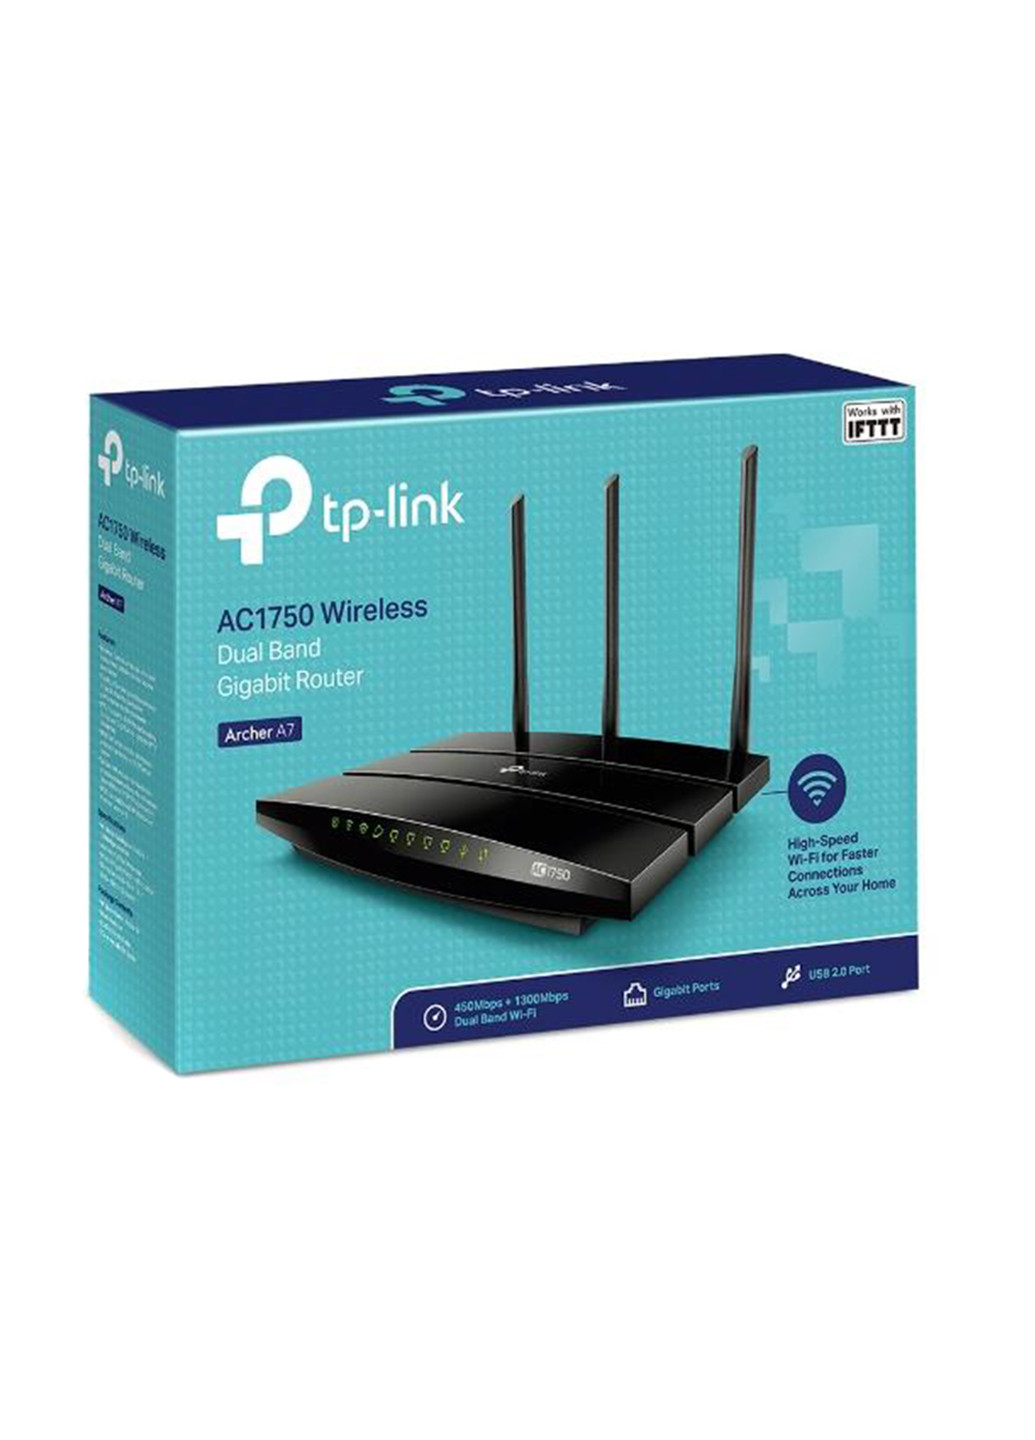 Маршрутизатор ARCHER-A7 TP-Link маршрутизатор tp-link archer-a7 (135817402)